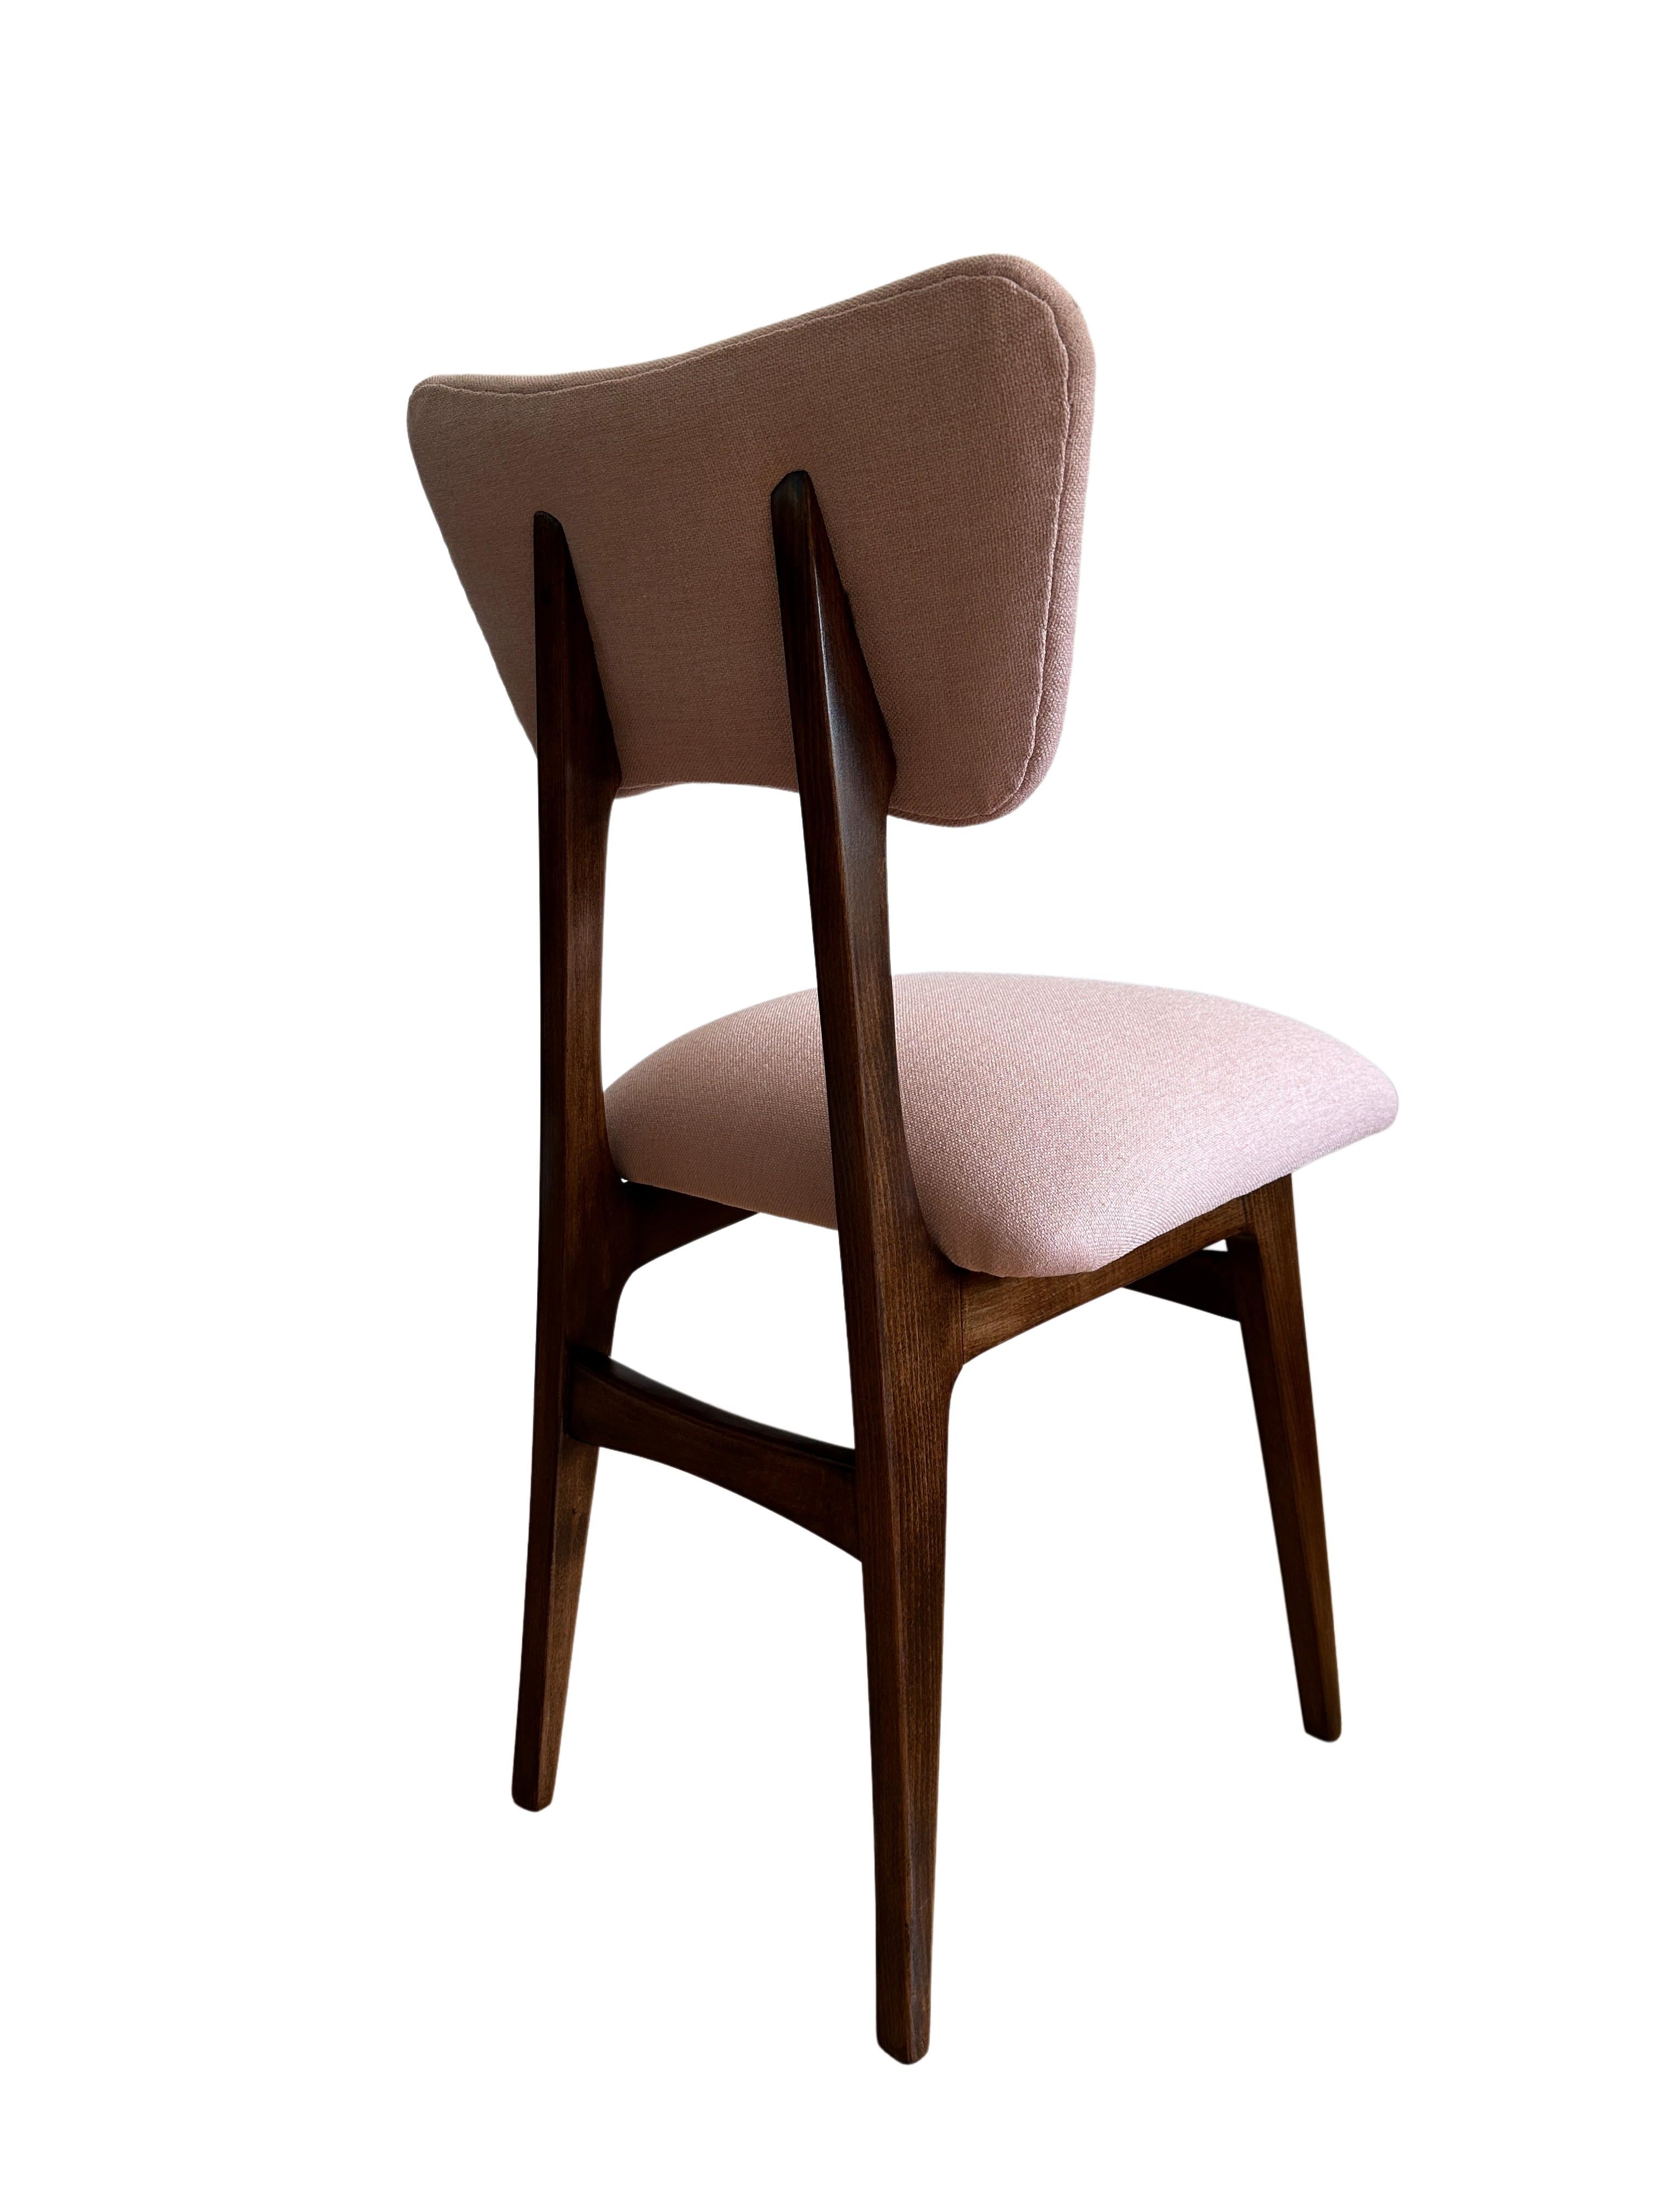 20th Century Set of 2 Midcentury Light Pink Dining Chairs, Europe, 1960s For Sale